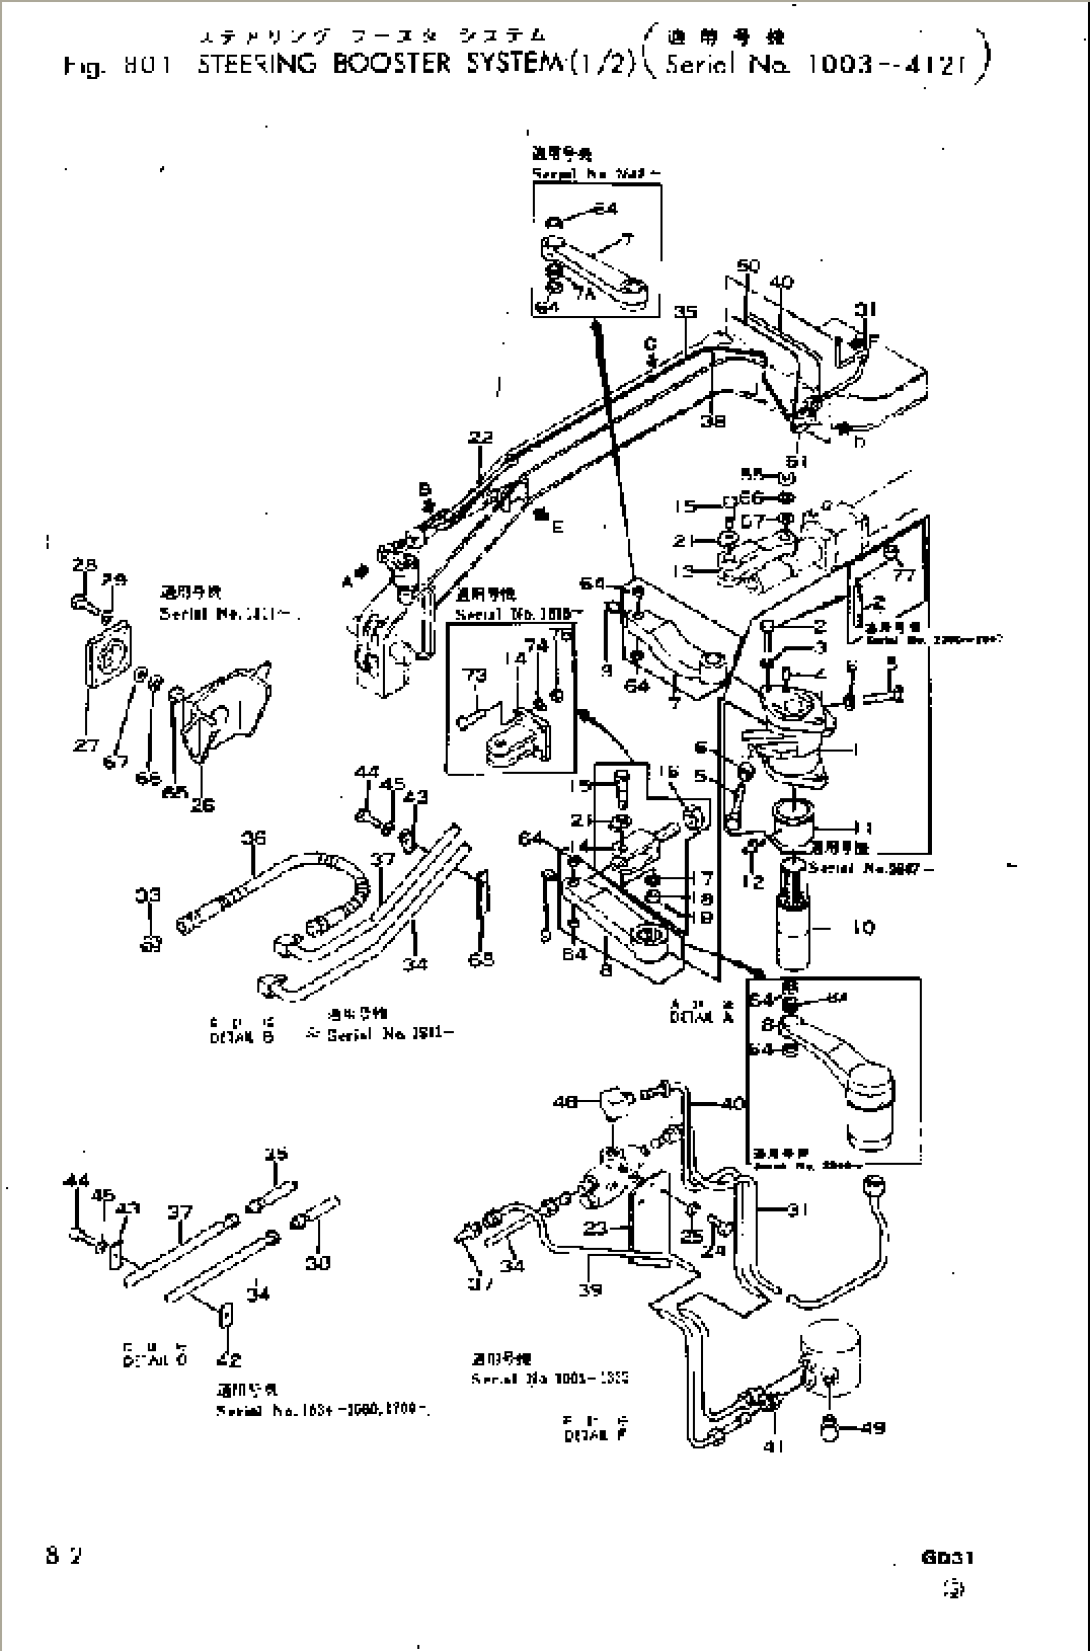 STEERING BOOSTER SYSTEM (1/2)